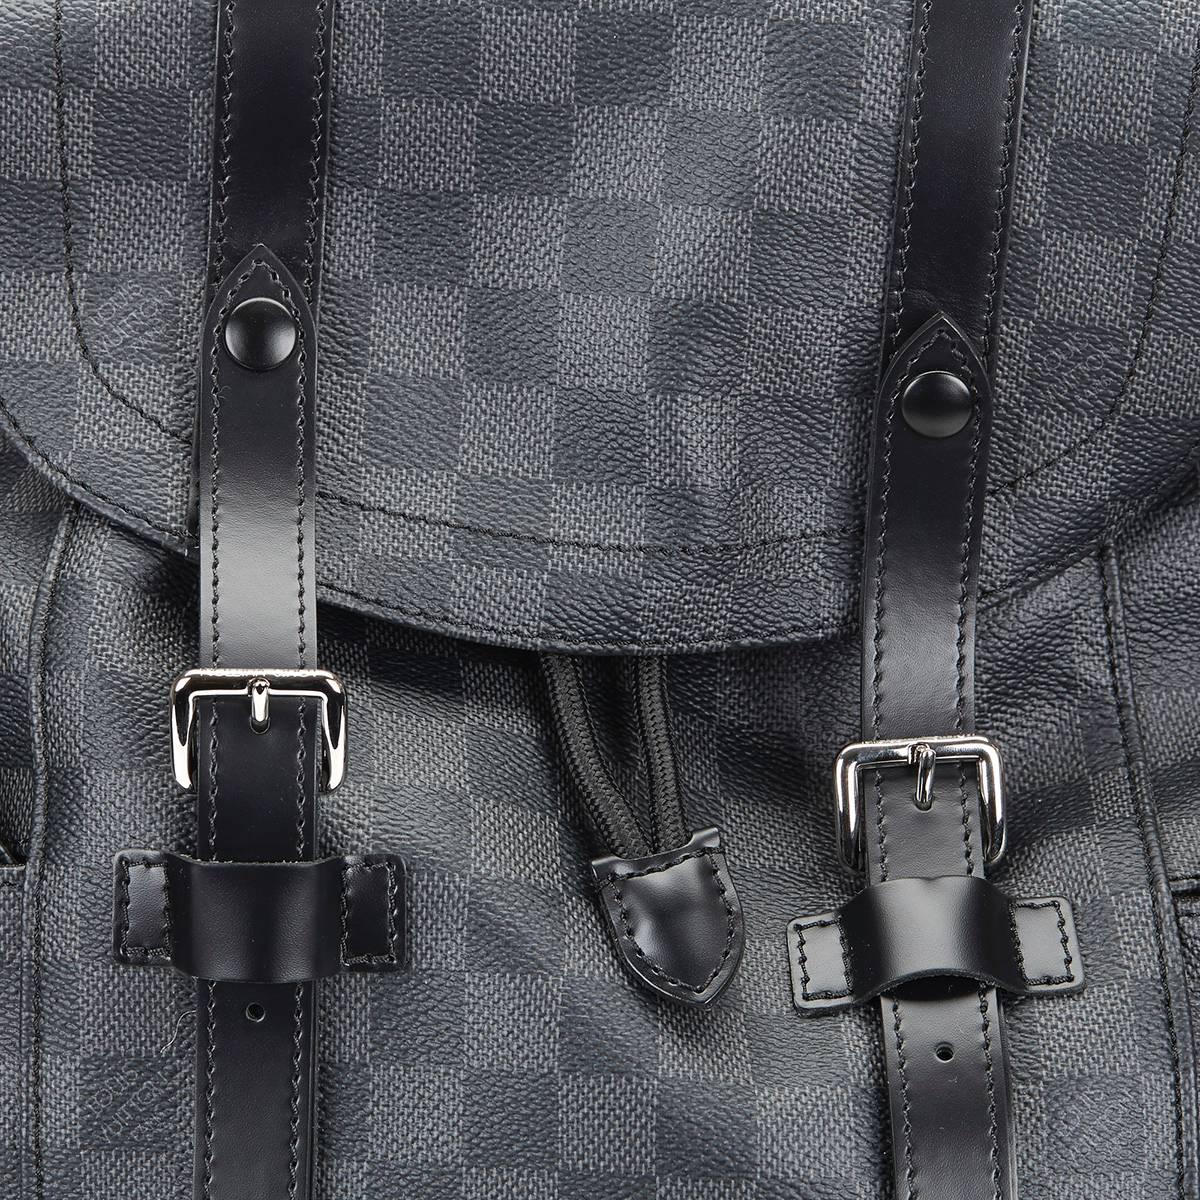 louis vuitton christopher pm backpack